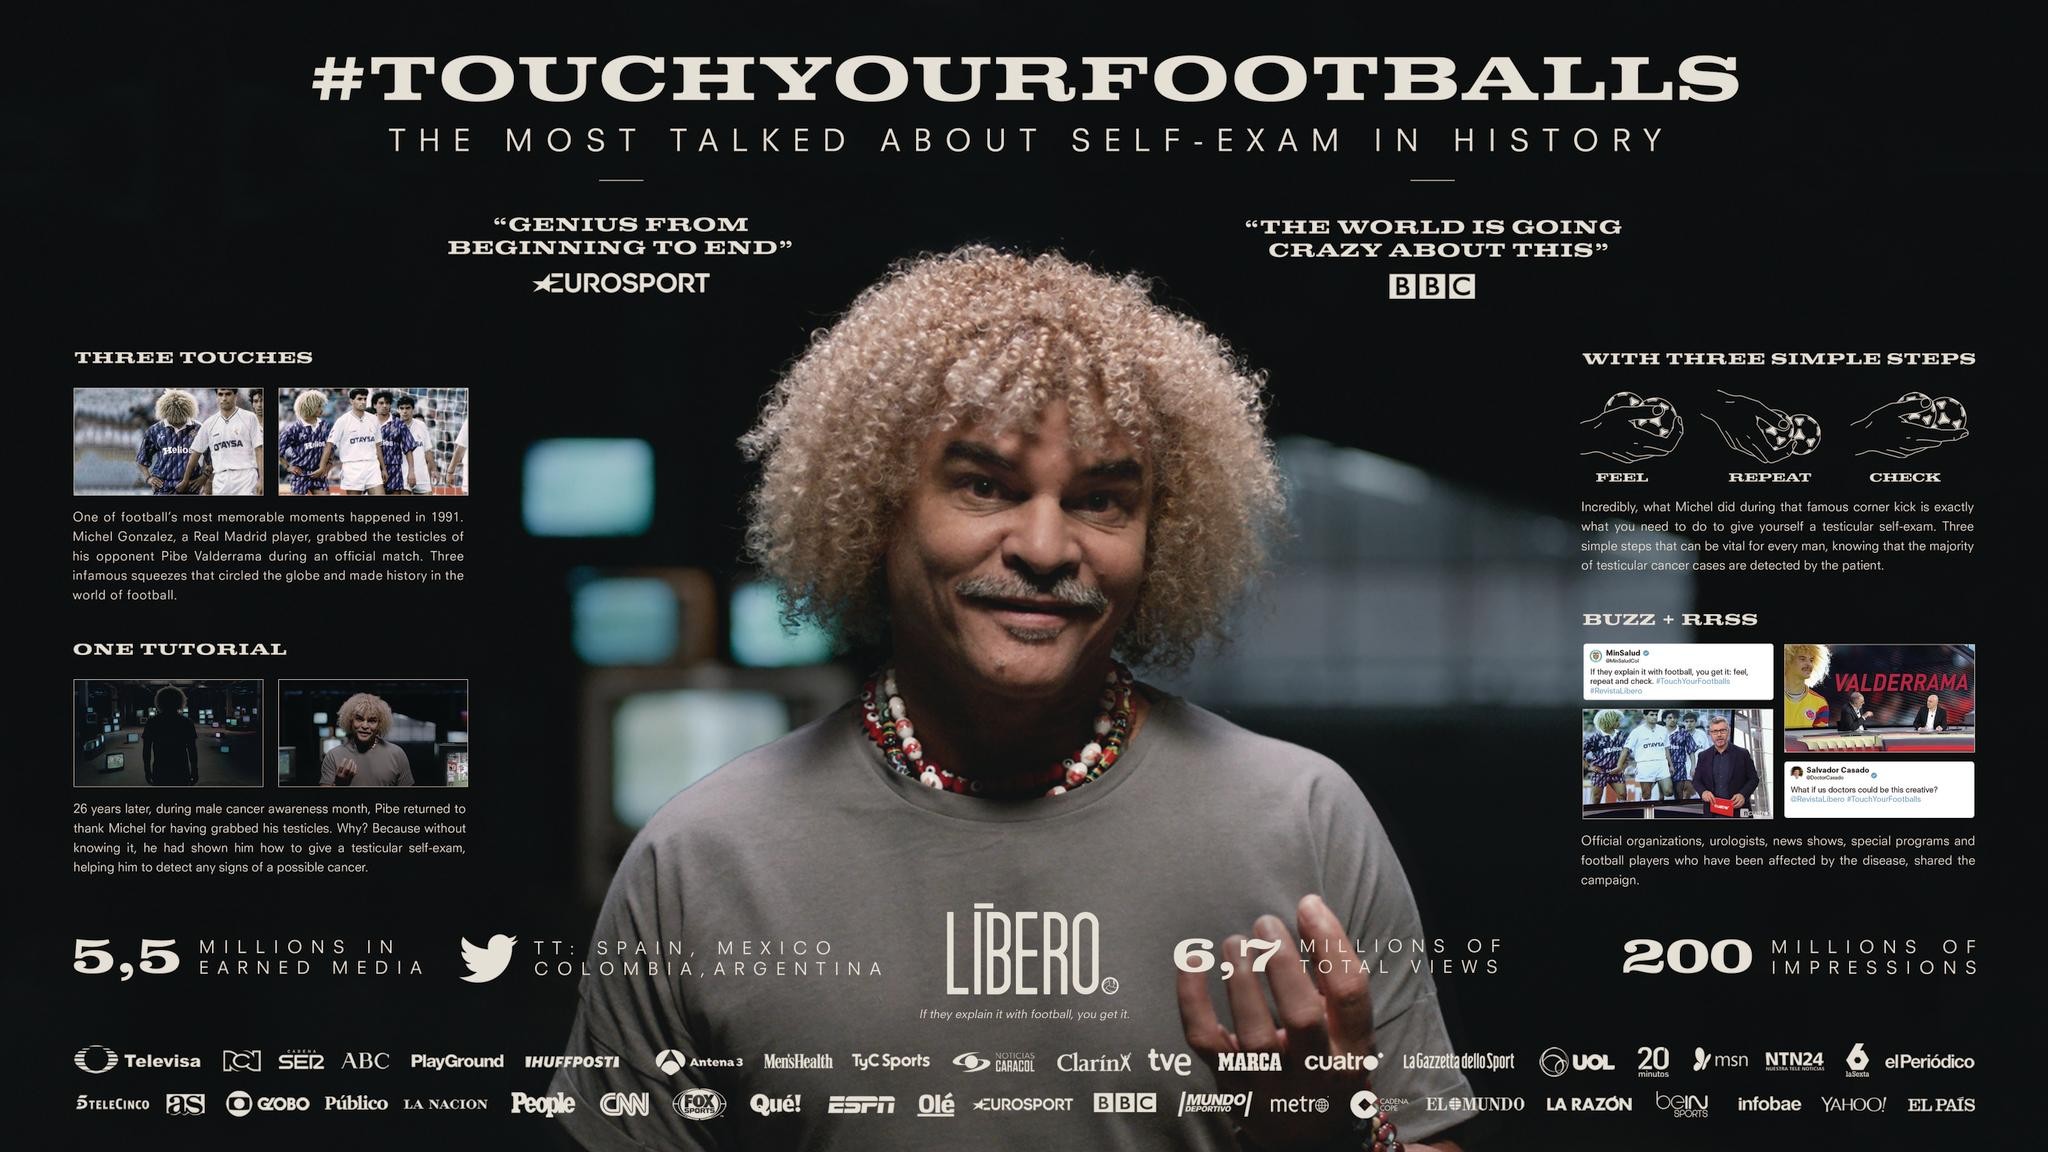 TOUCH YOUR FOOTBALLS